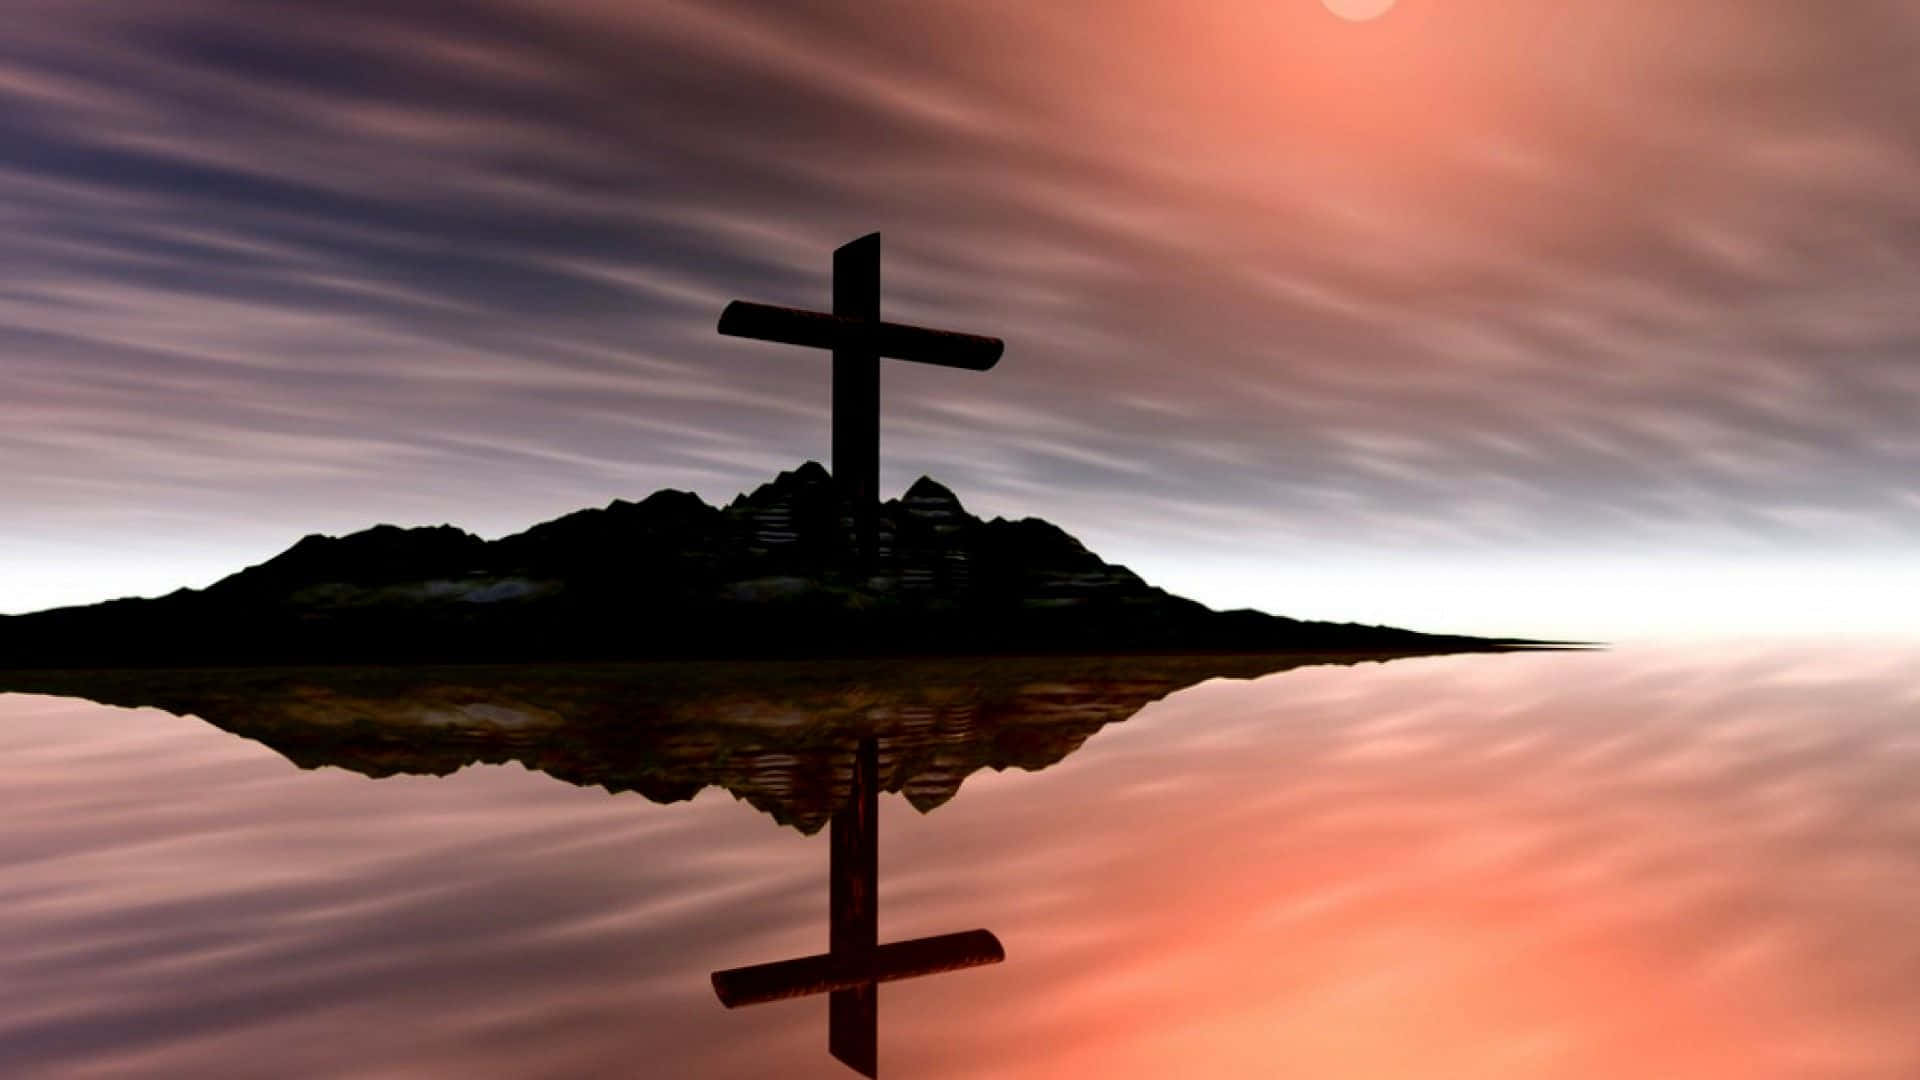 A symbolic reminder of faith Wallpaper